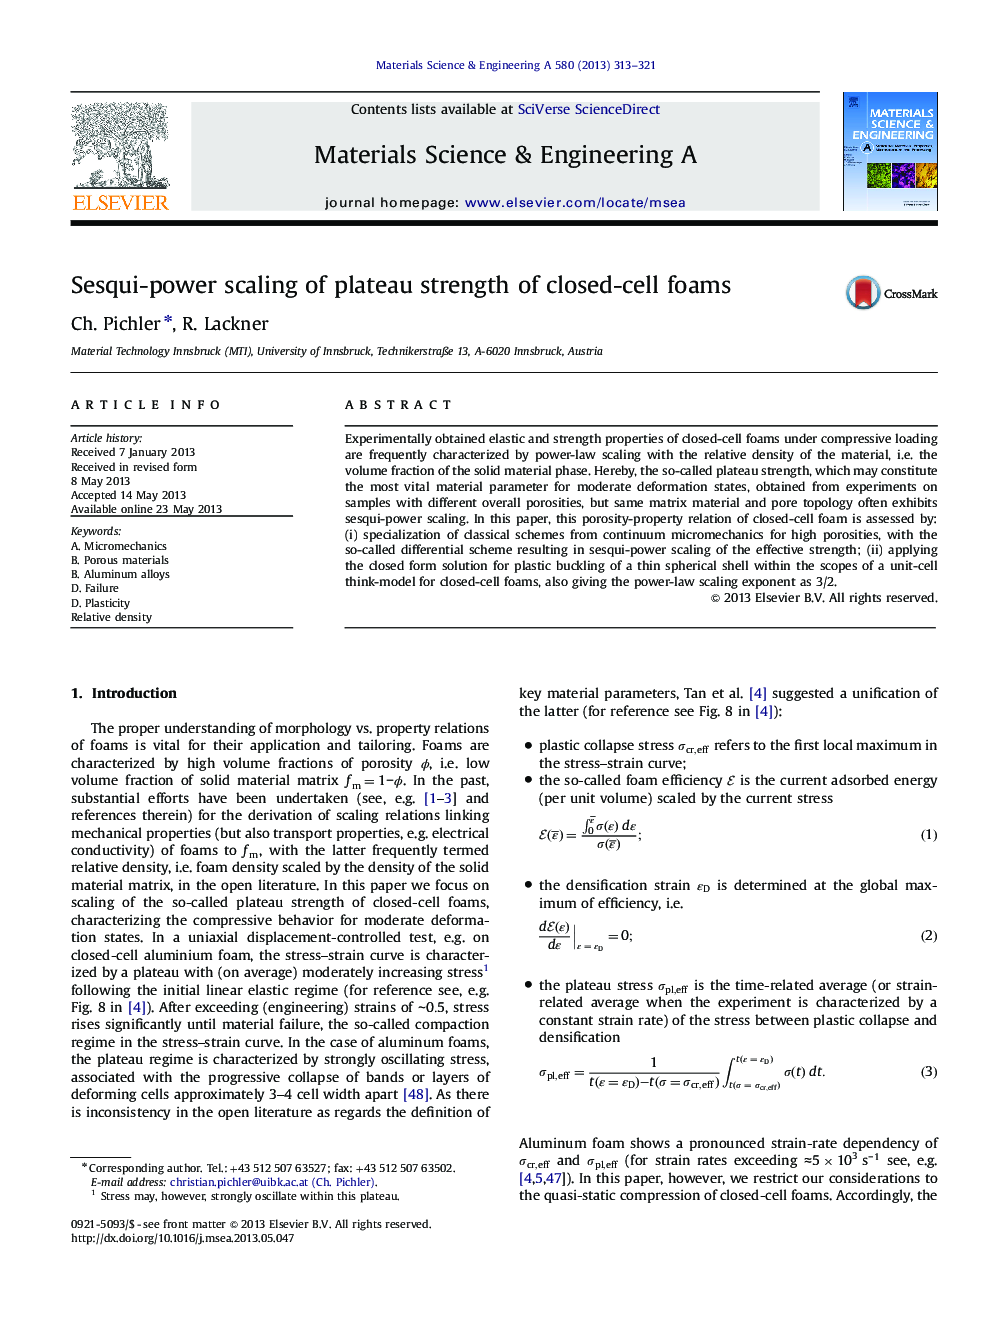 Sesqui-power scaling of plateau strength of closed-cell foams